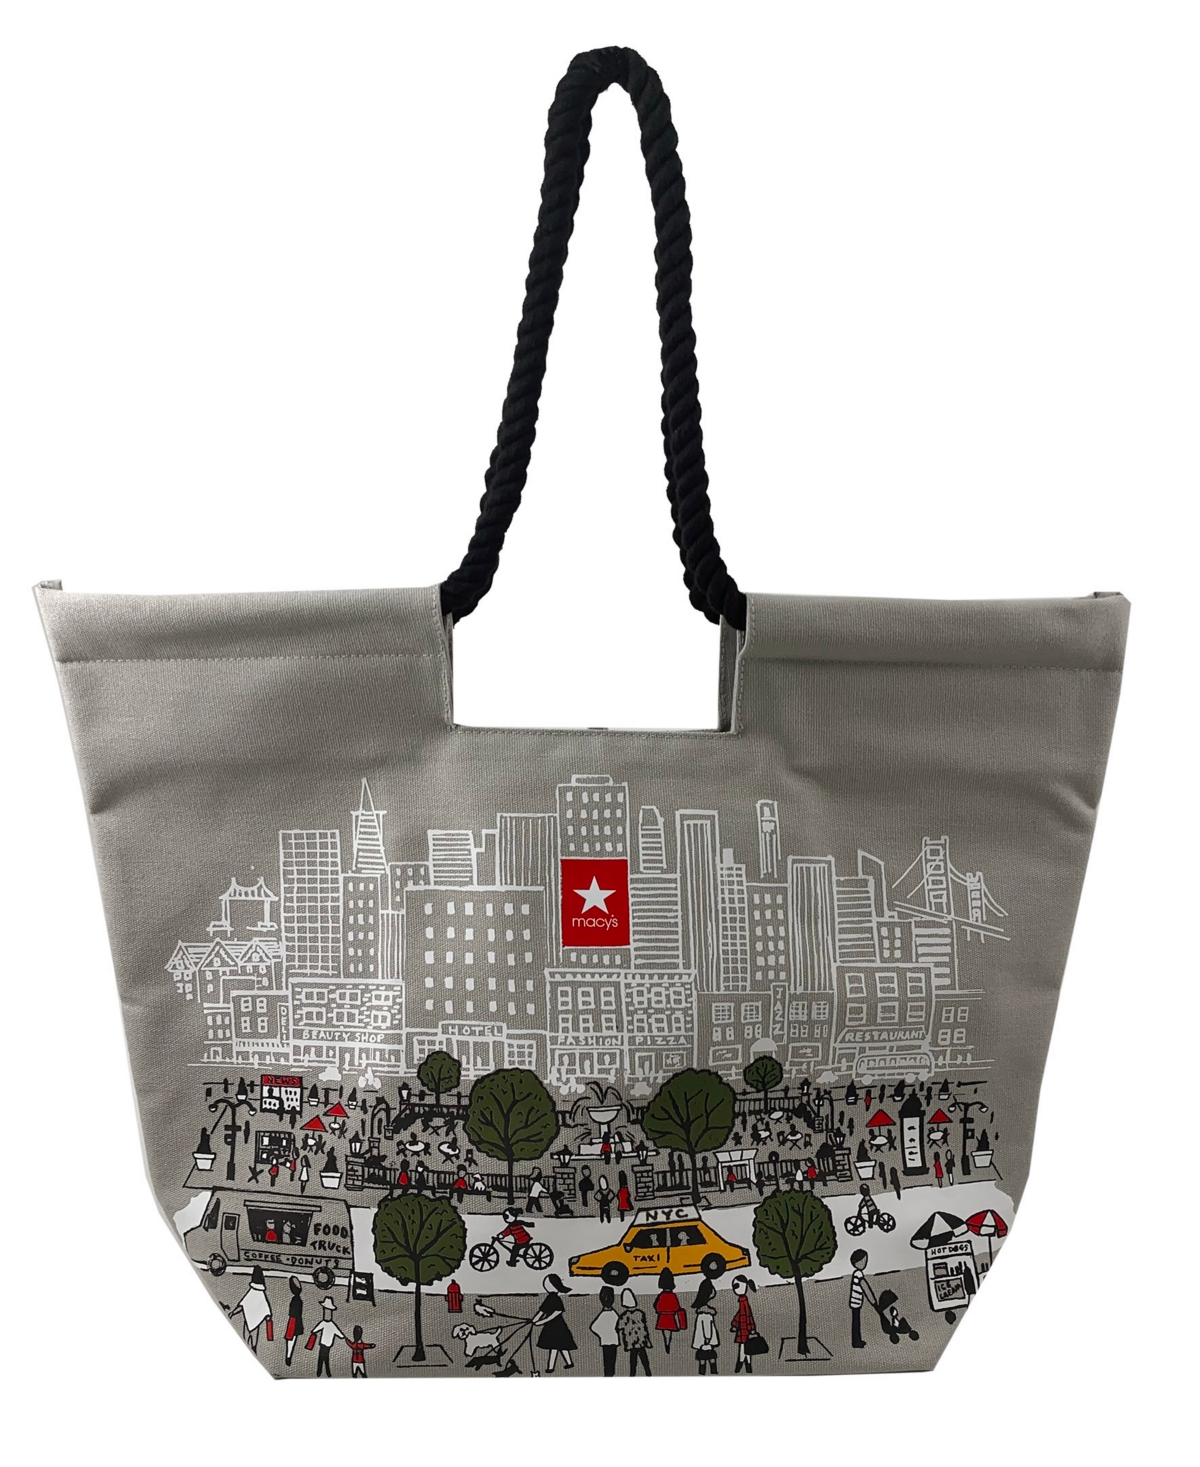 New York City Large Weekender Bag, Created for Macy's - Gray